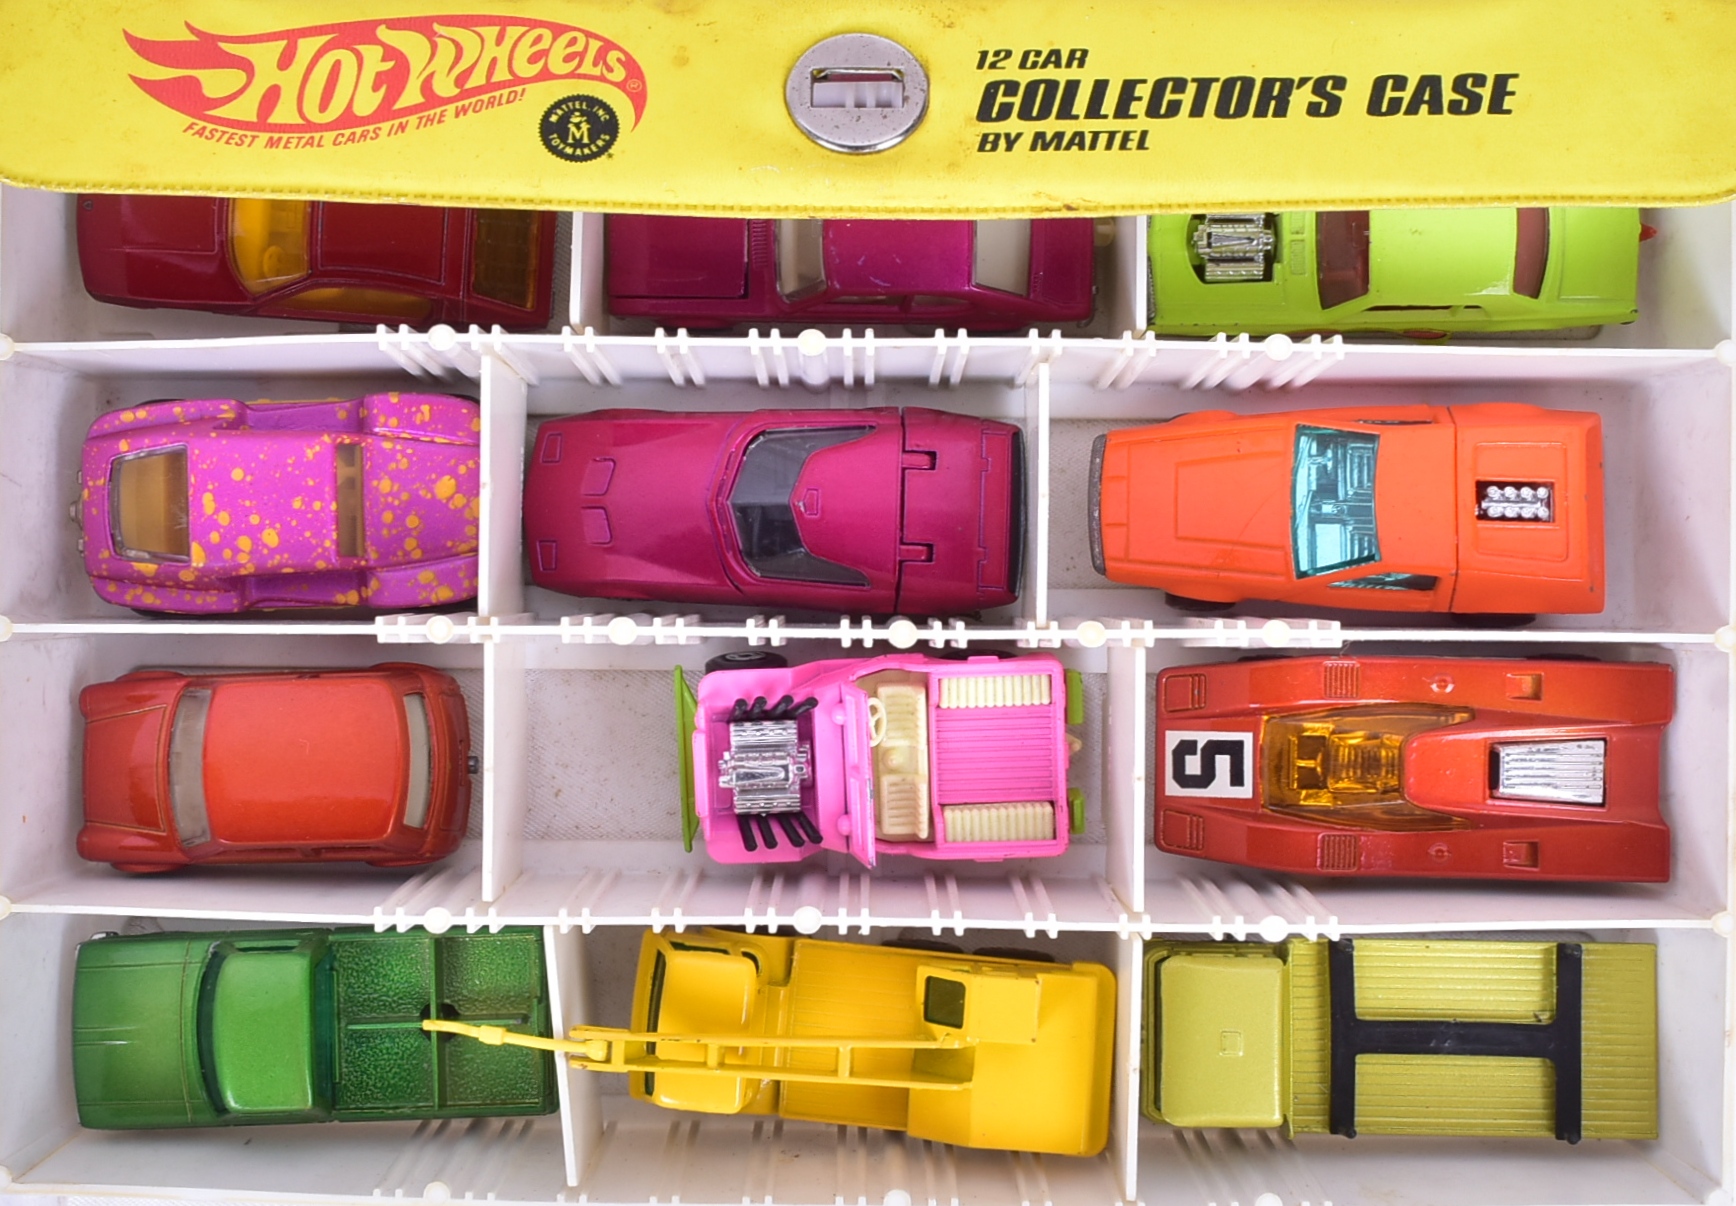 DIECAST - VINTAGE MATTEL HOT WHEELS COLLECTORS CASE WITH CARS - Image 2 of 5